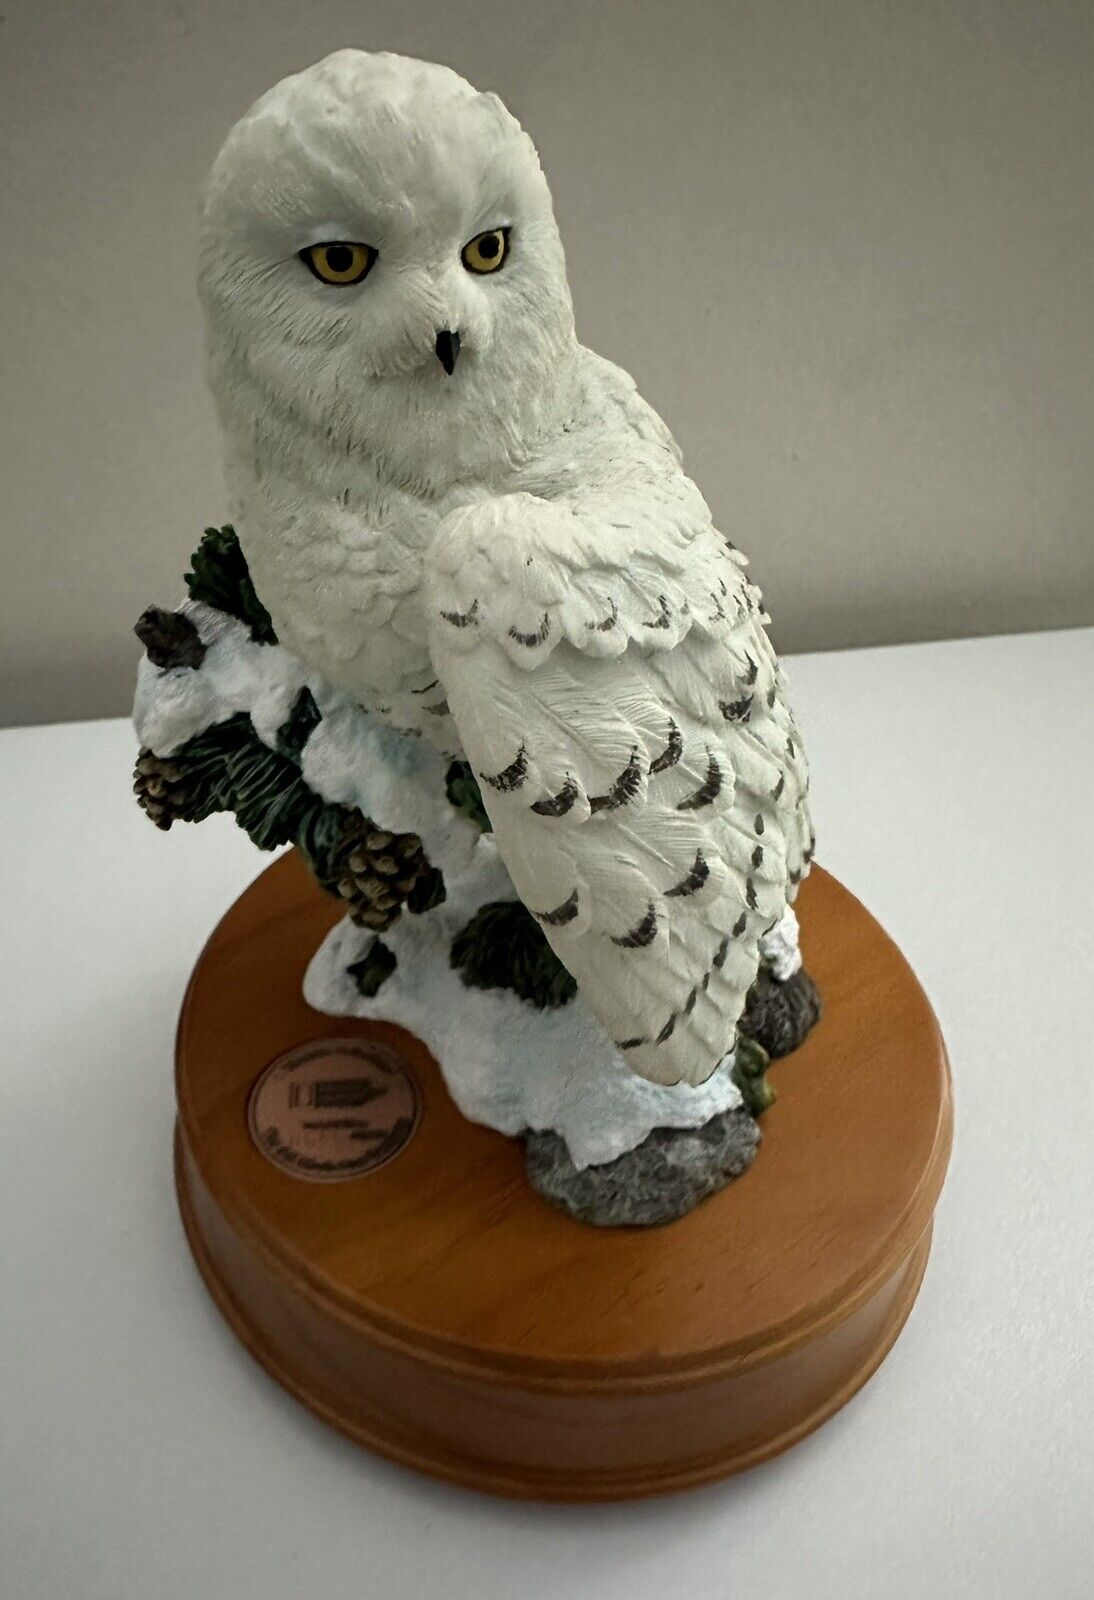 Owl Limited Edition Collectible Musical Figurine National Geographic with COA